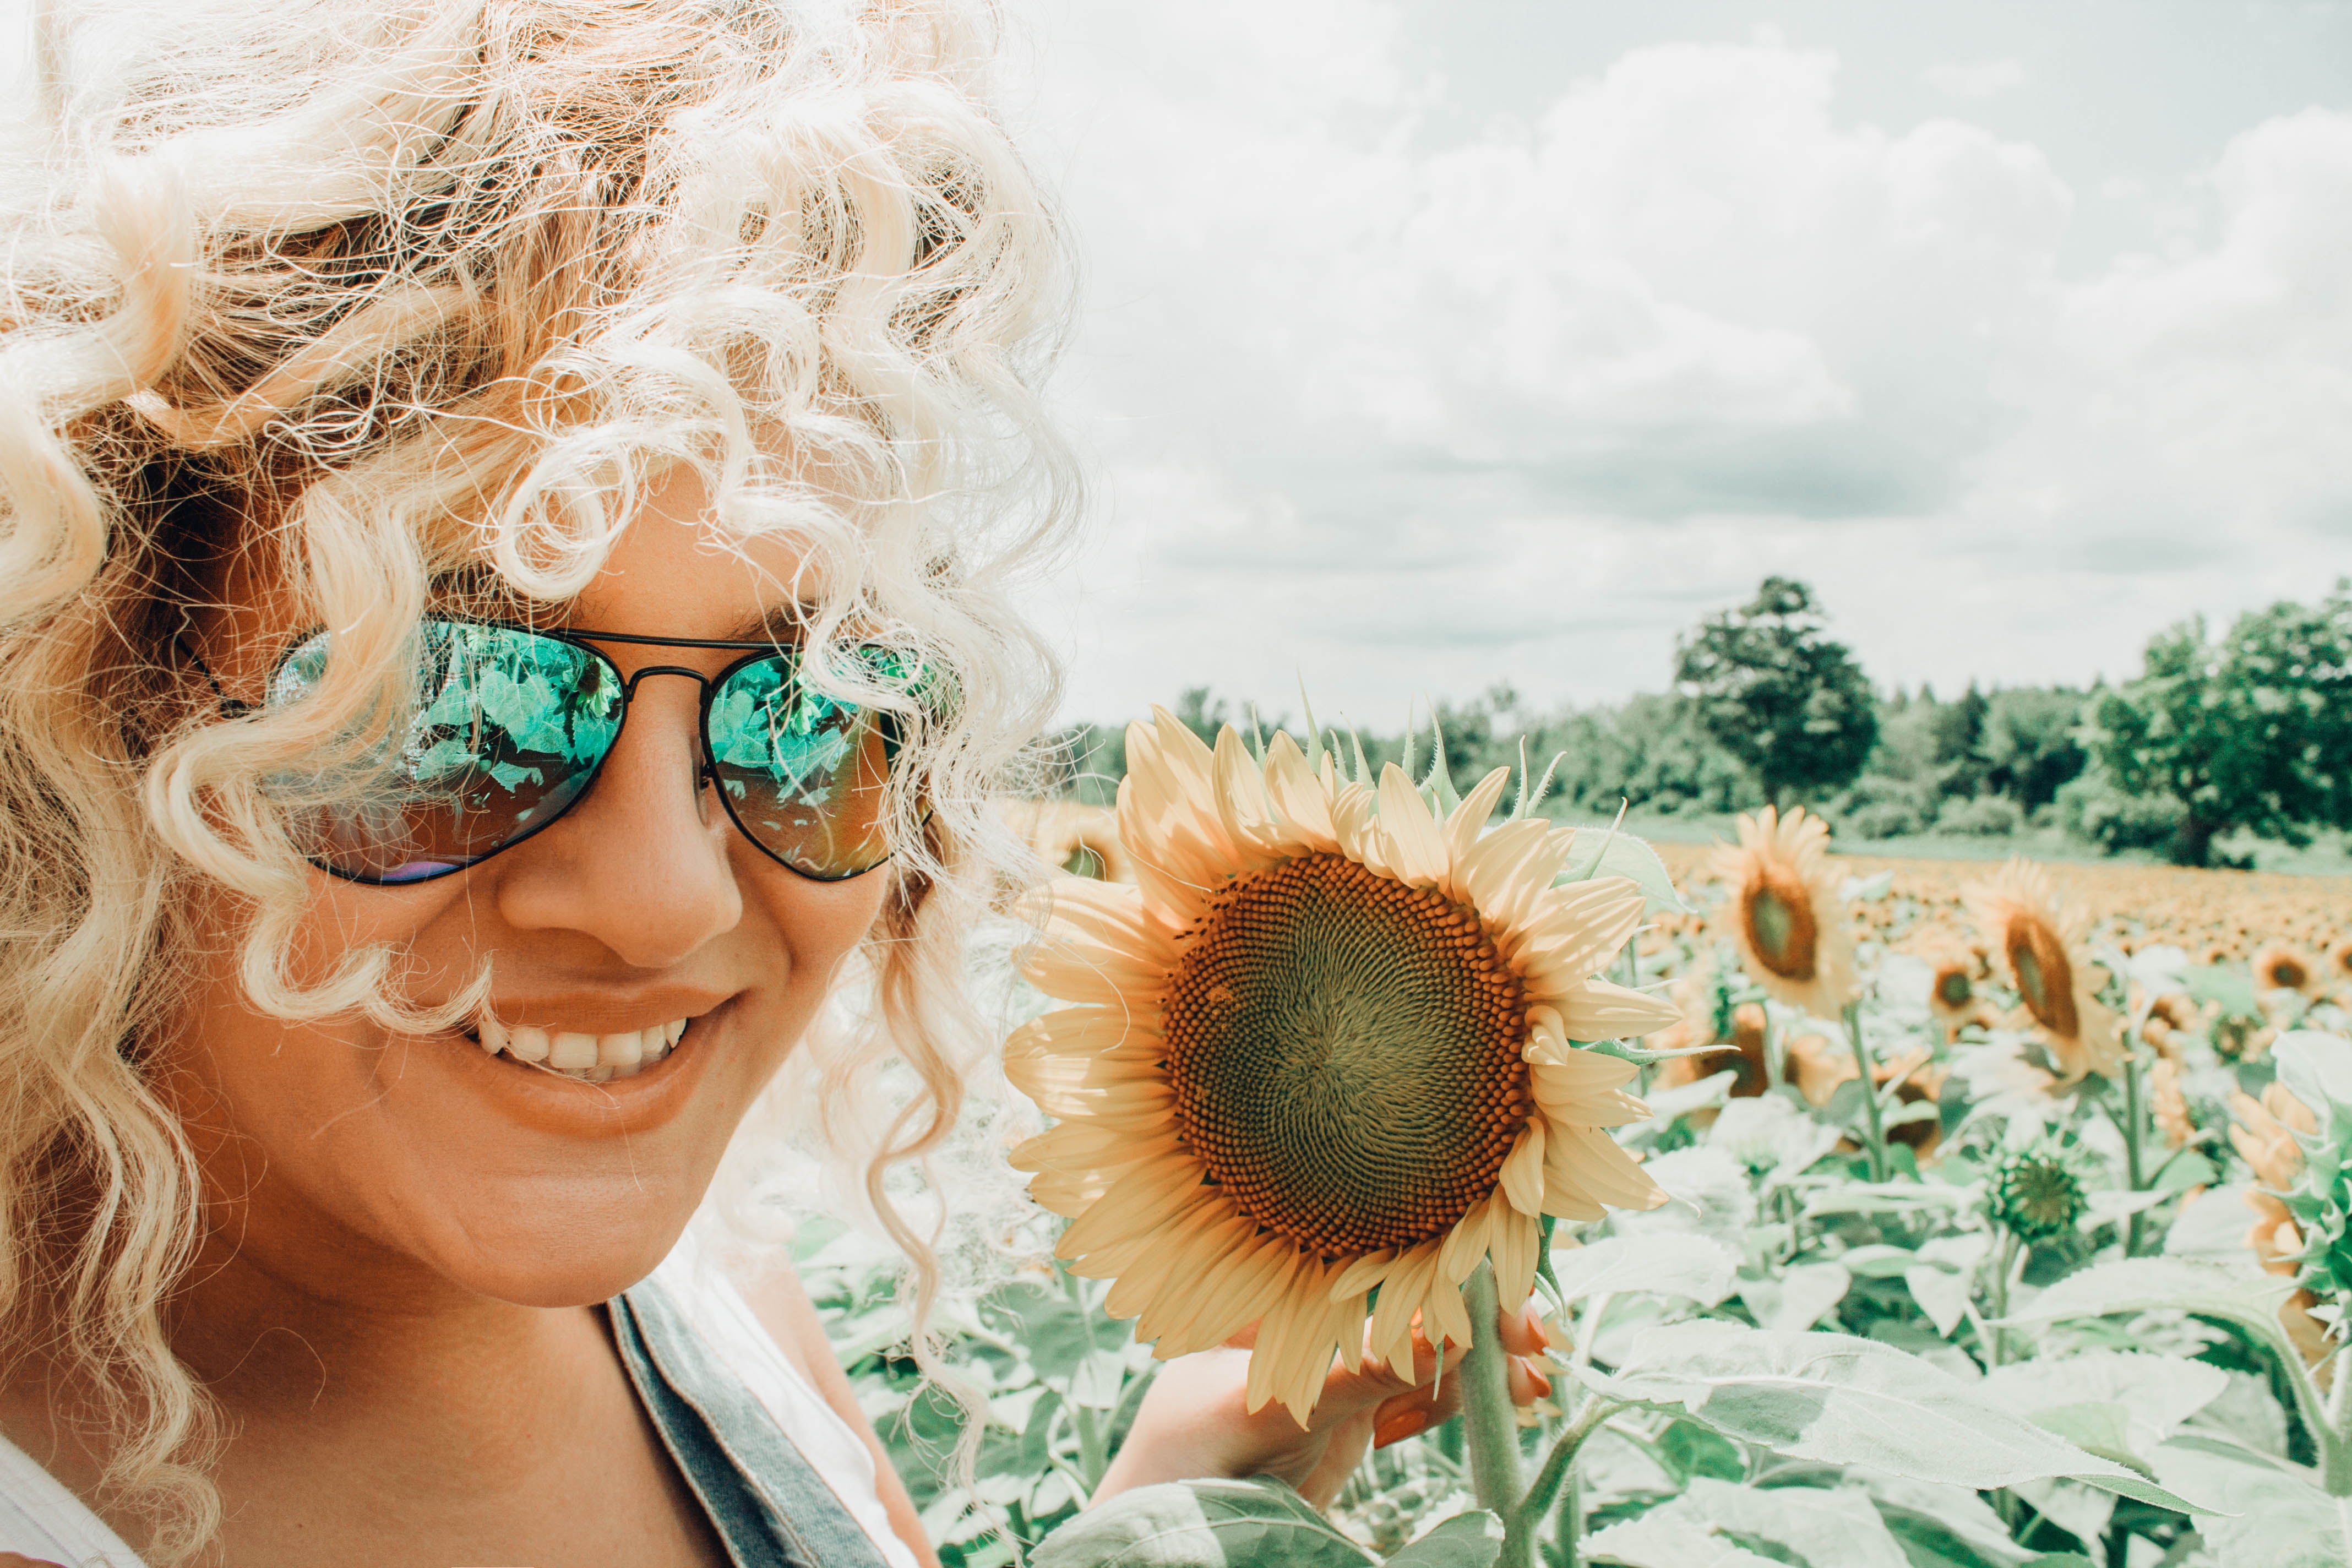 Woman with curly haistyle is taking her selfie with the sunflowers